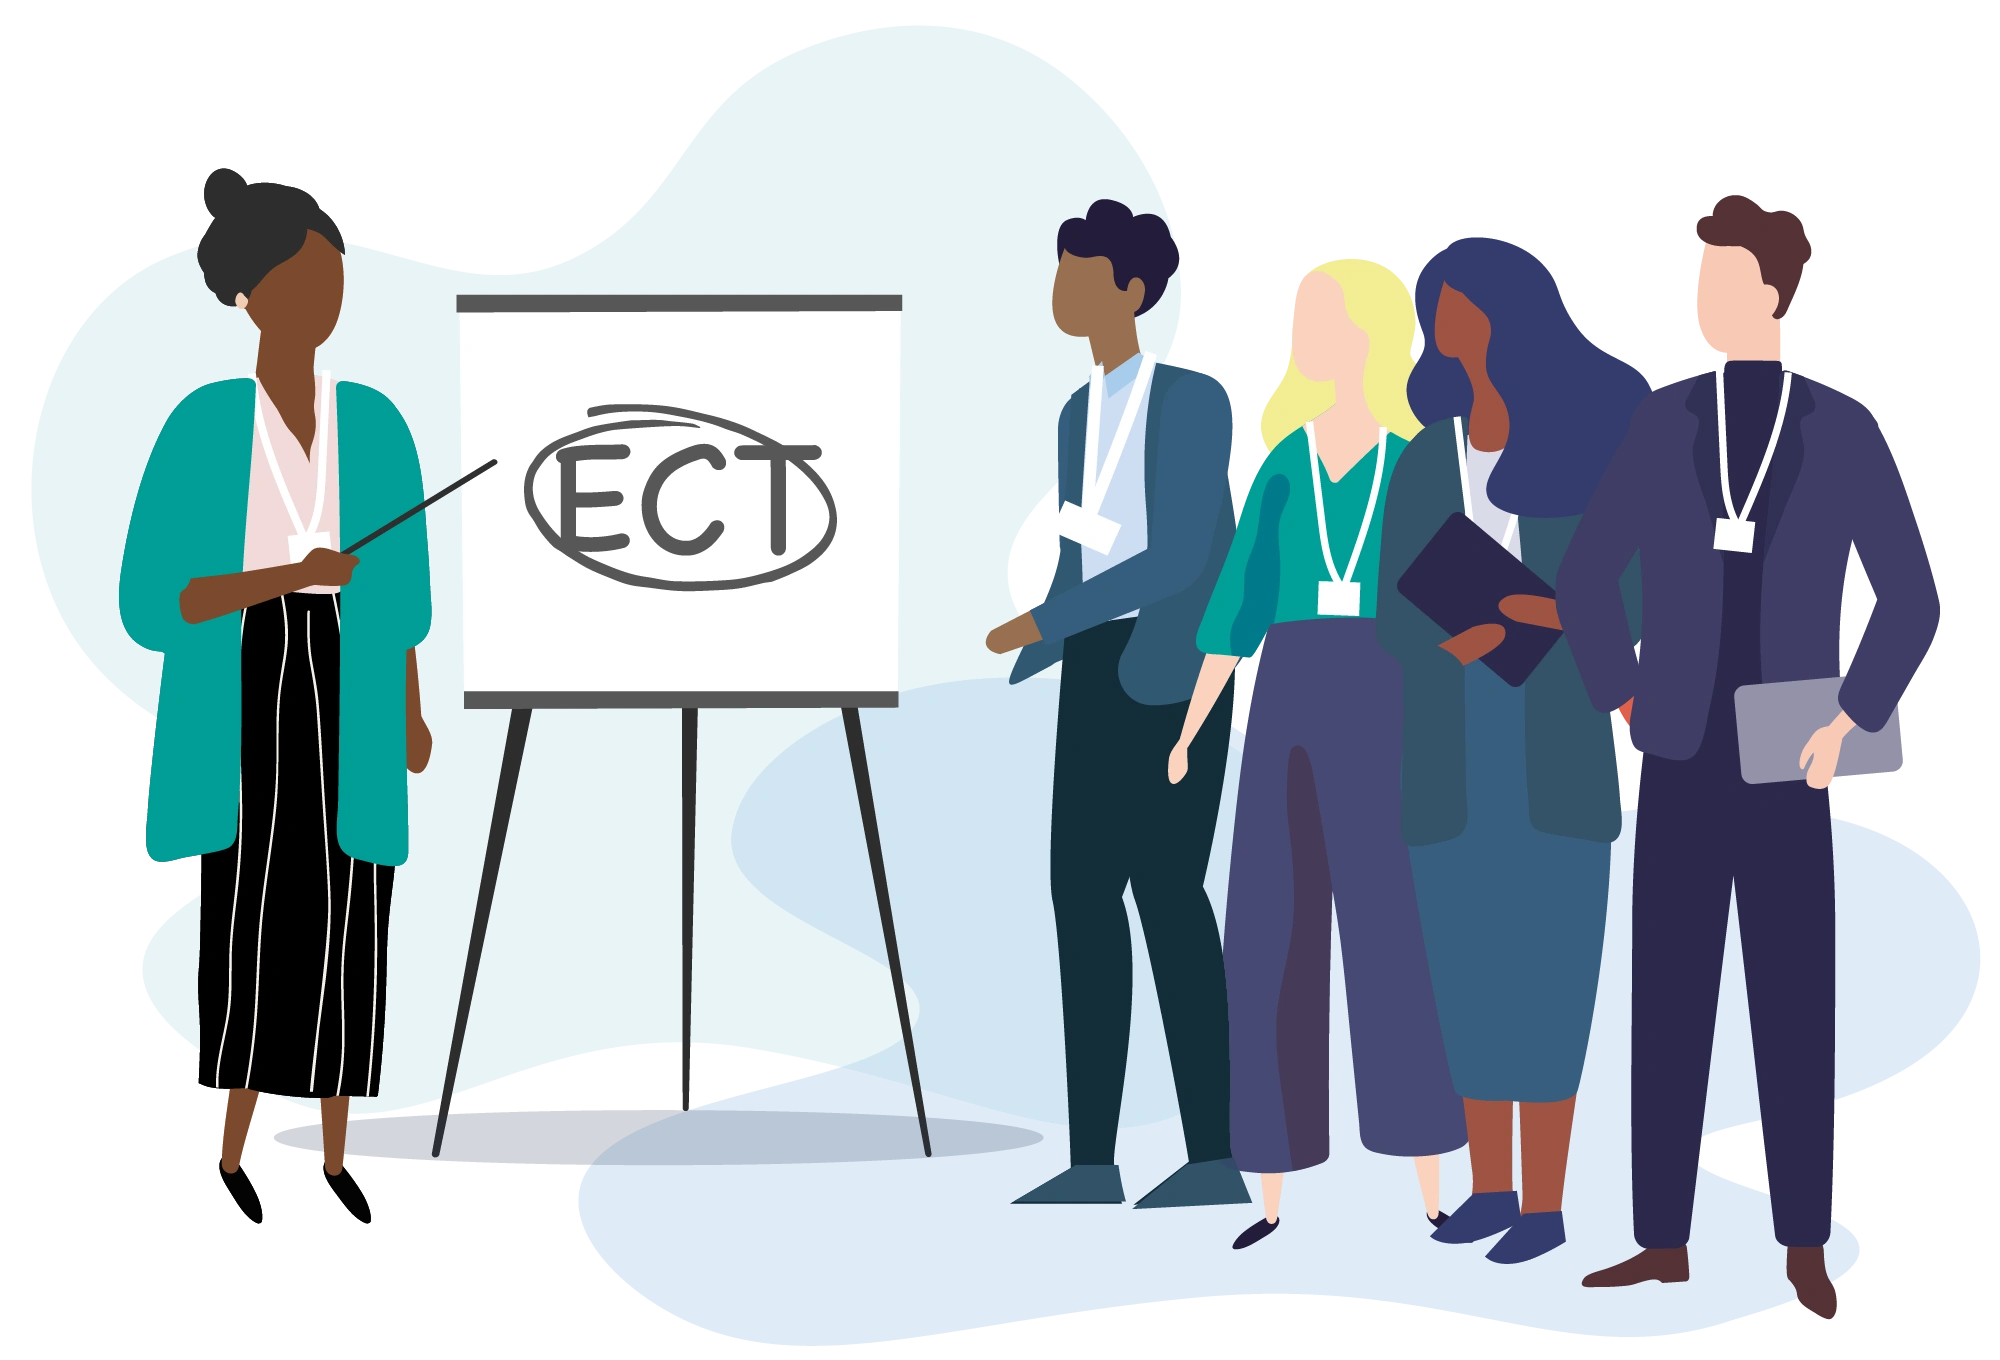 What development can you expect from your ECT induction?